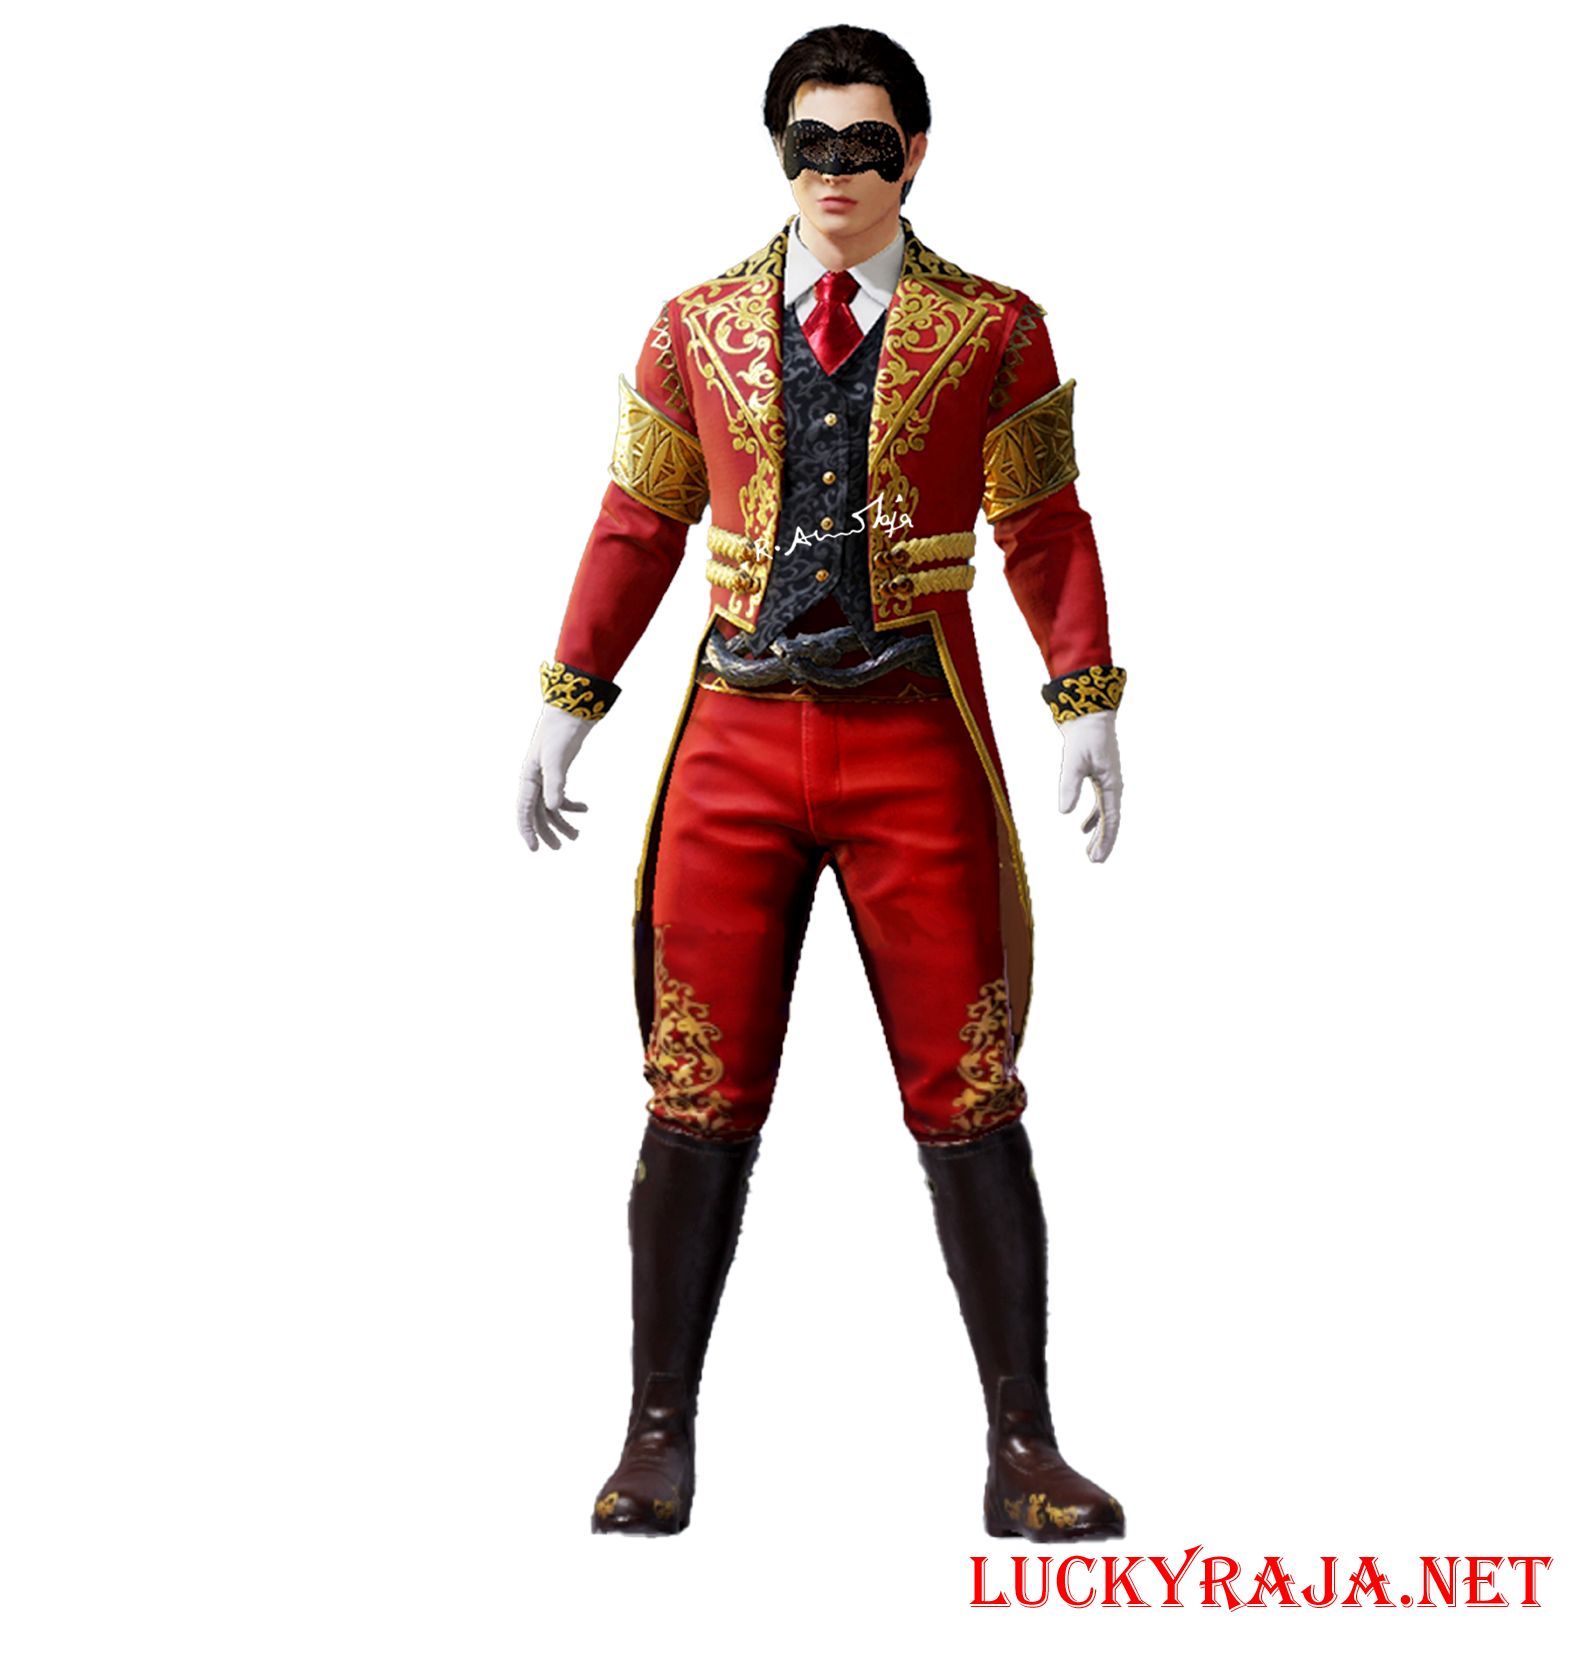 Royal Magician ,Royal Magician images,Royal Magician pubg mobile,Royal Magician outfit,pubg mobile outfits,animation,cartoon images